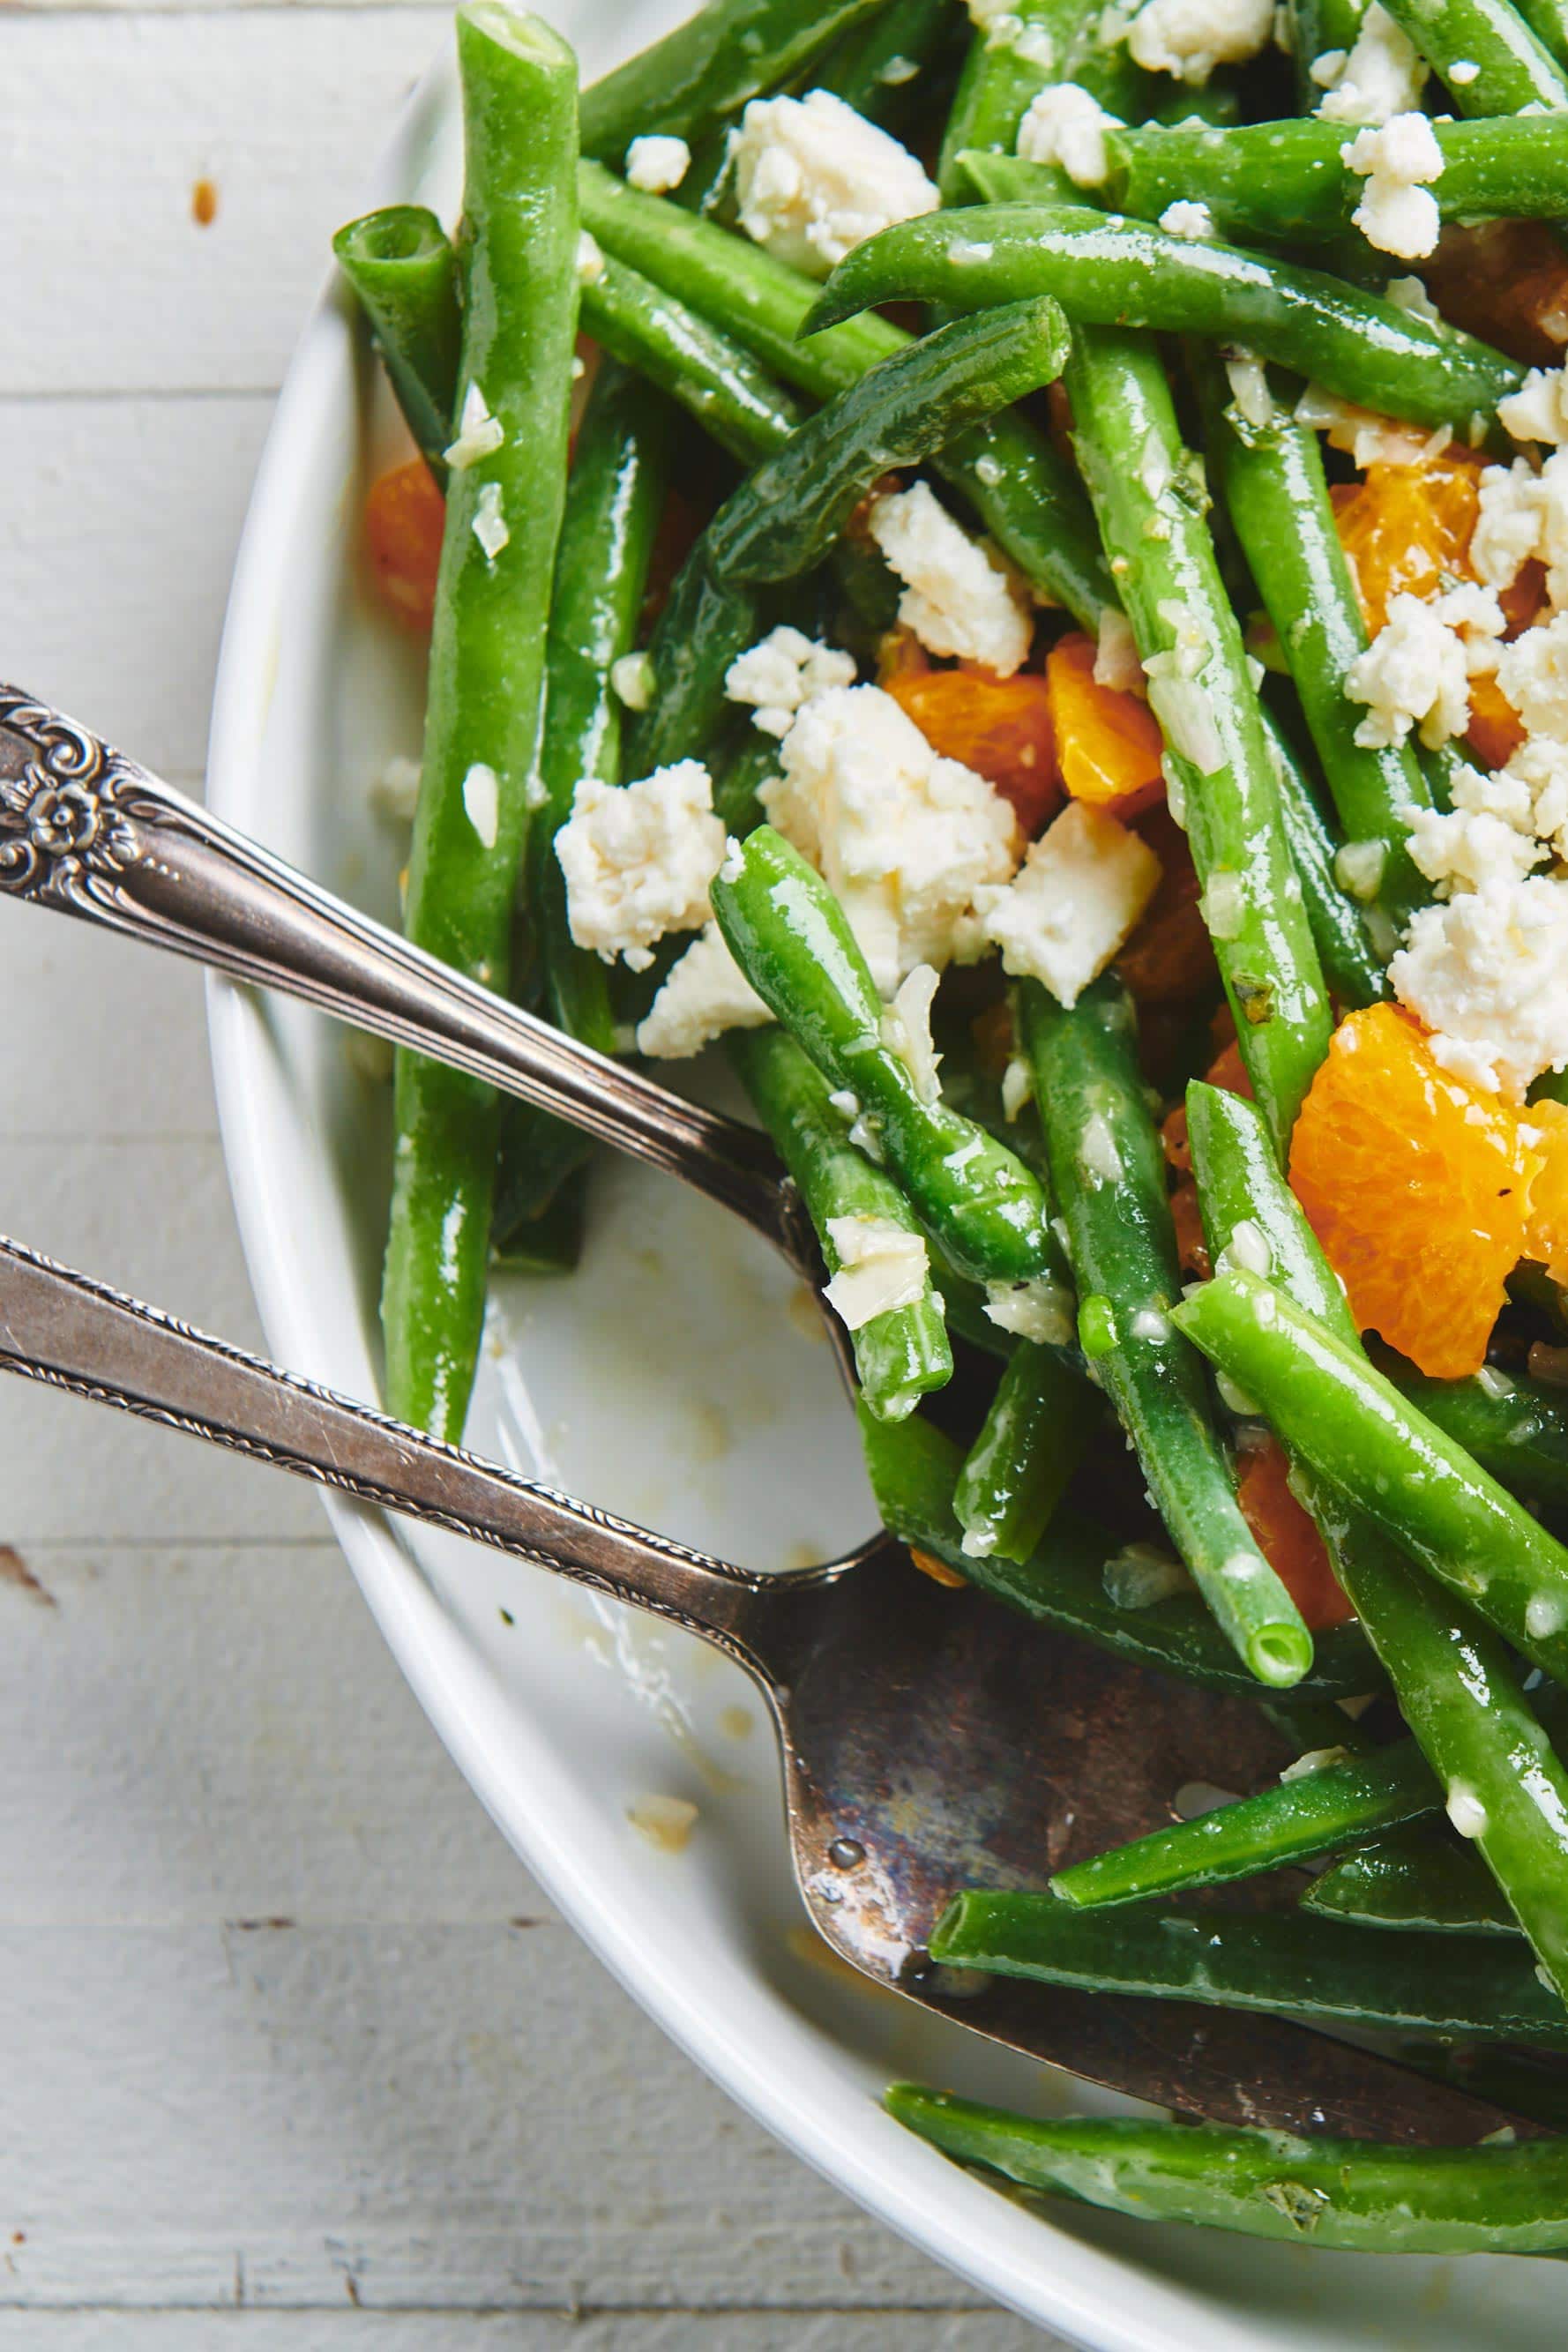 Utensils in a serving dish of Green Bean Salad with Clementine Oranges and Feta.